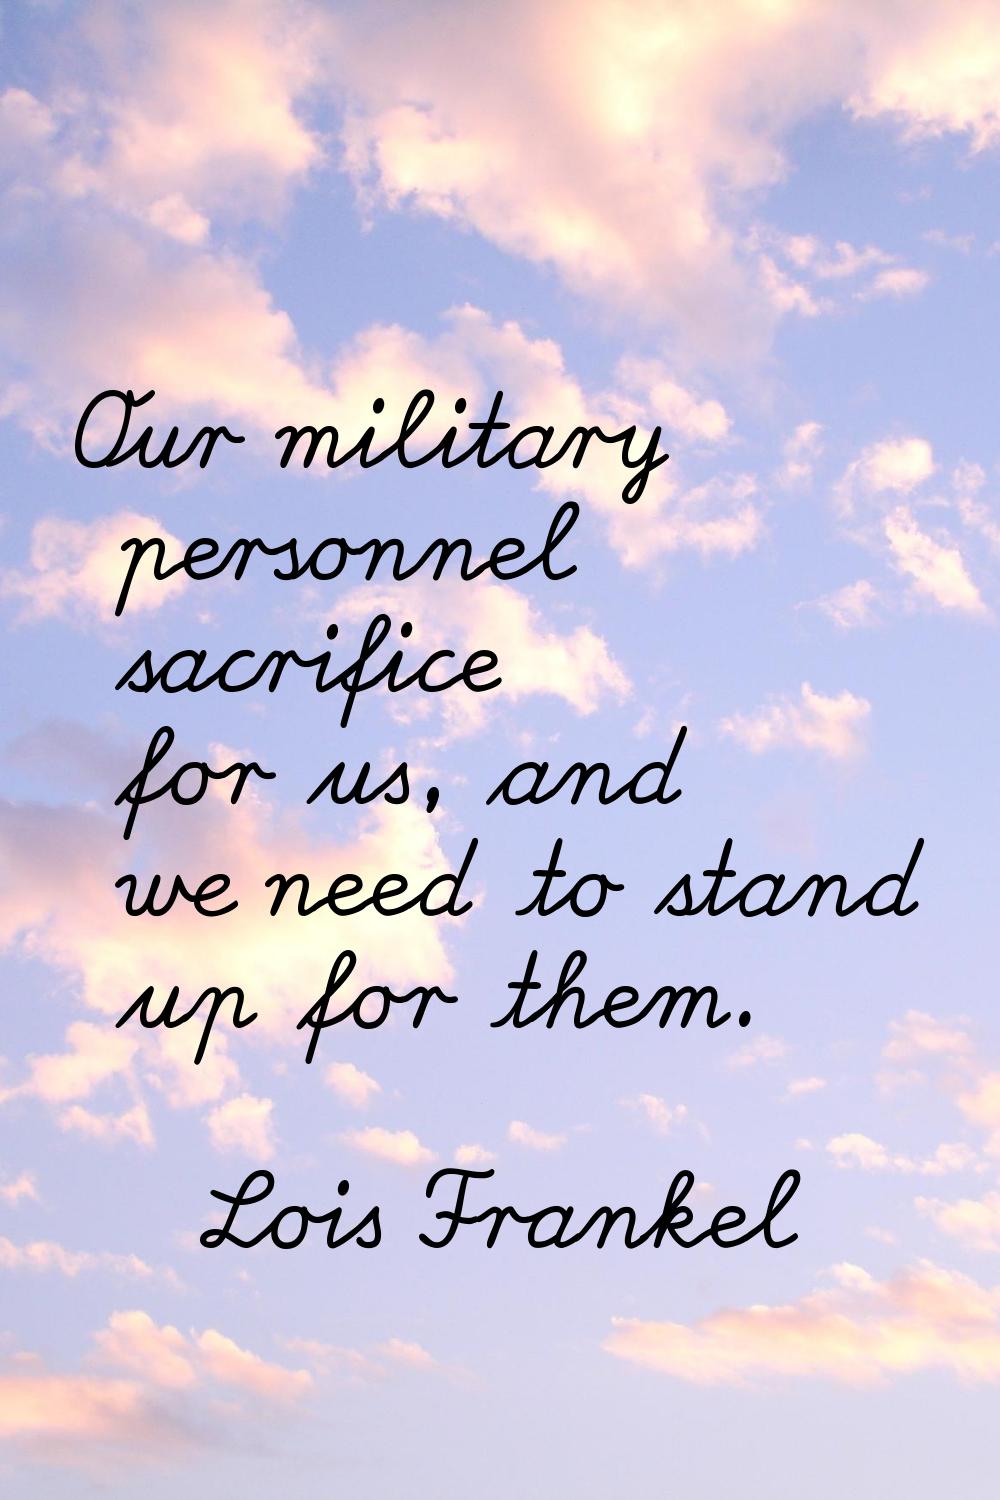 Our military personnel sacrifice for us, and we need to stand up for them.